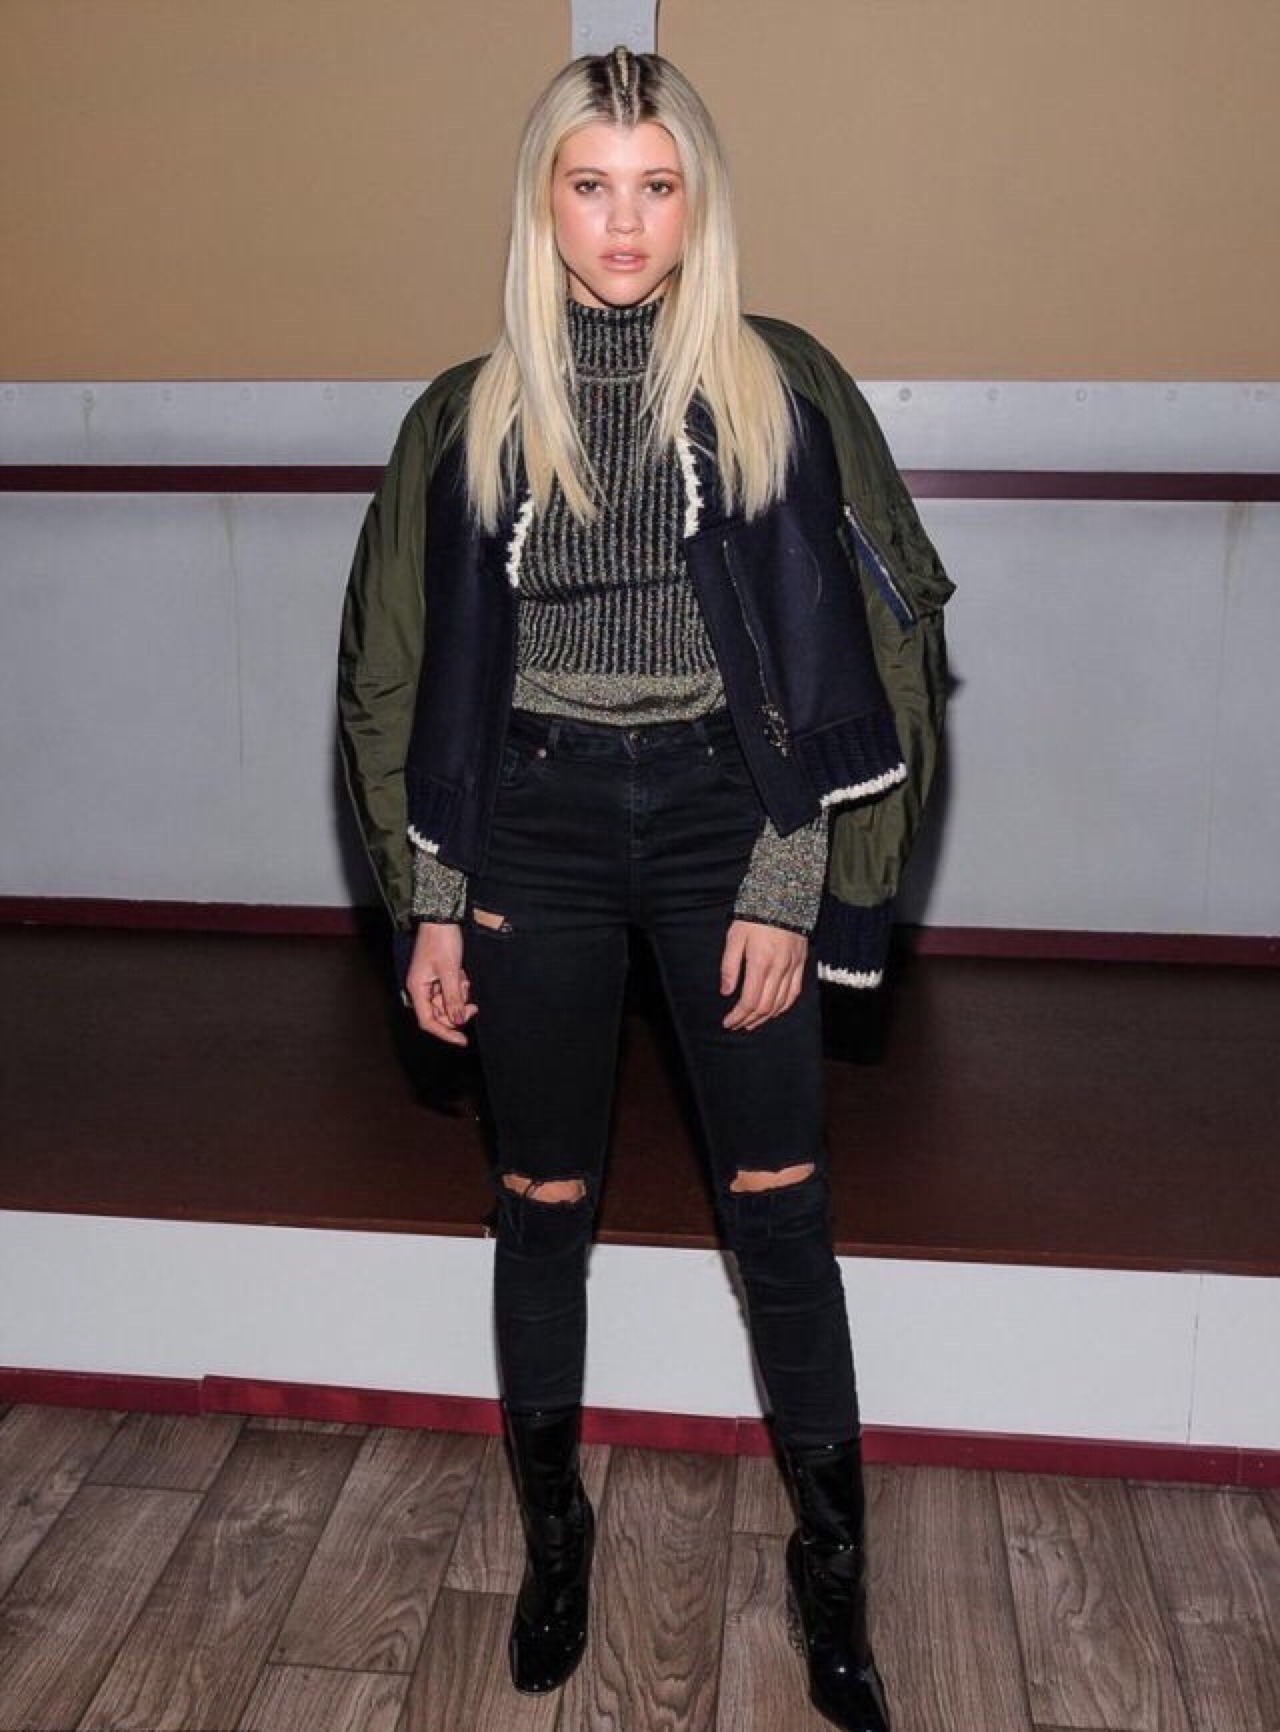 February 15, 2016 - Sofia Richie attends the Tommy Hilfiger Women’s fashion show during Fall 2016 New York Fashion Week